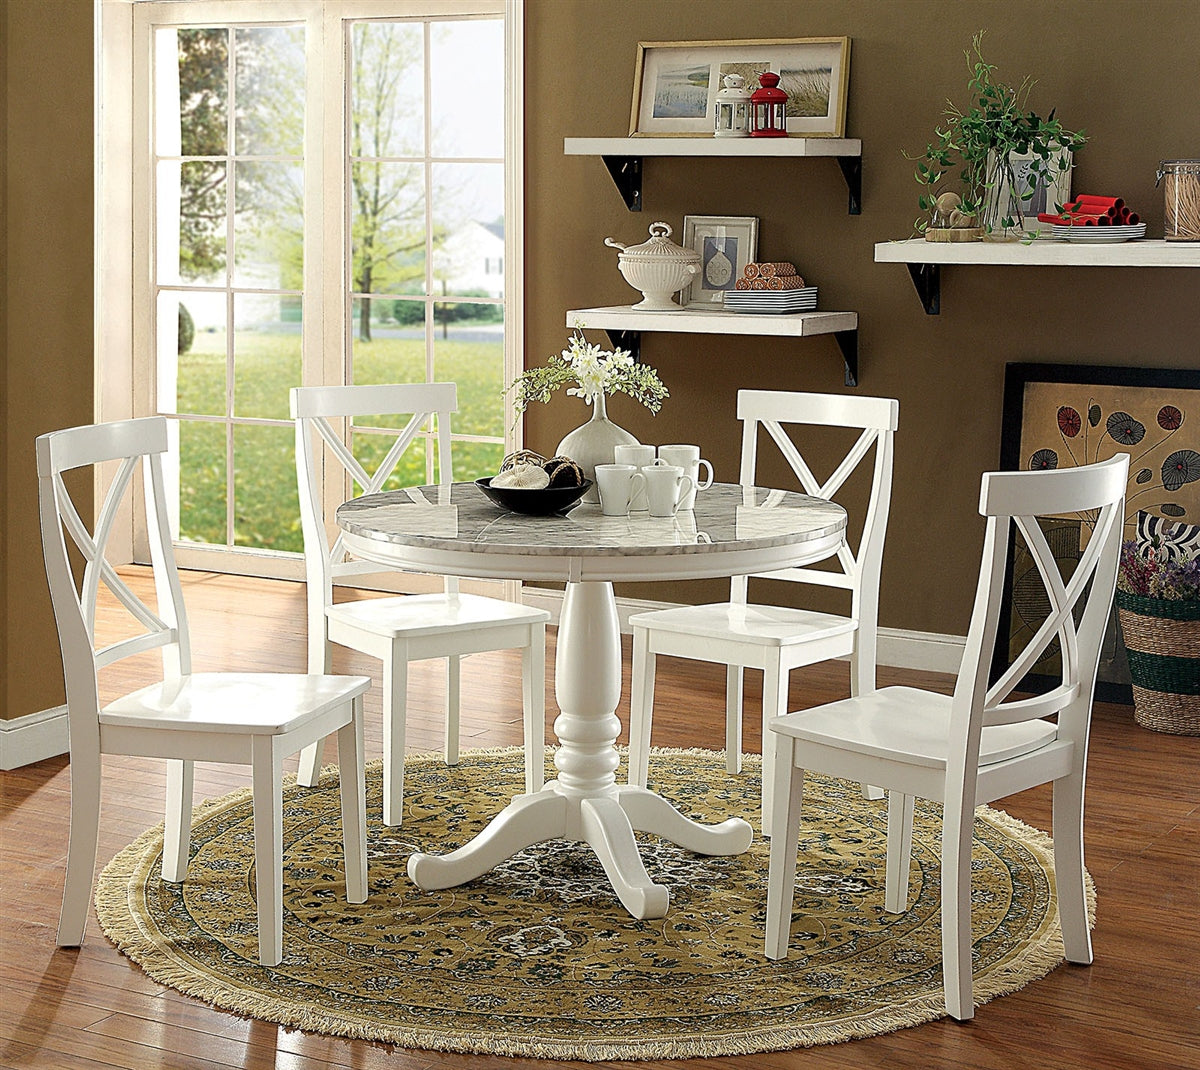 Penelope 5 Piece Dining Set W- Faux Marble Top